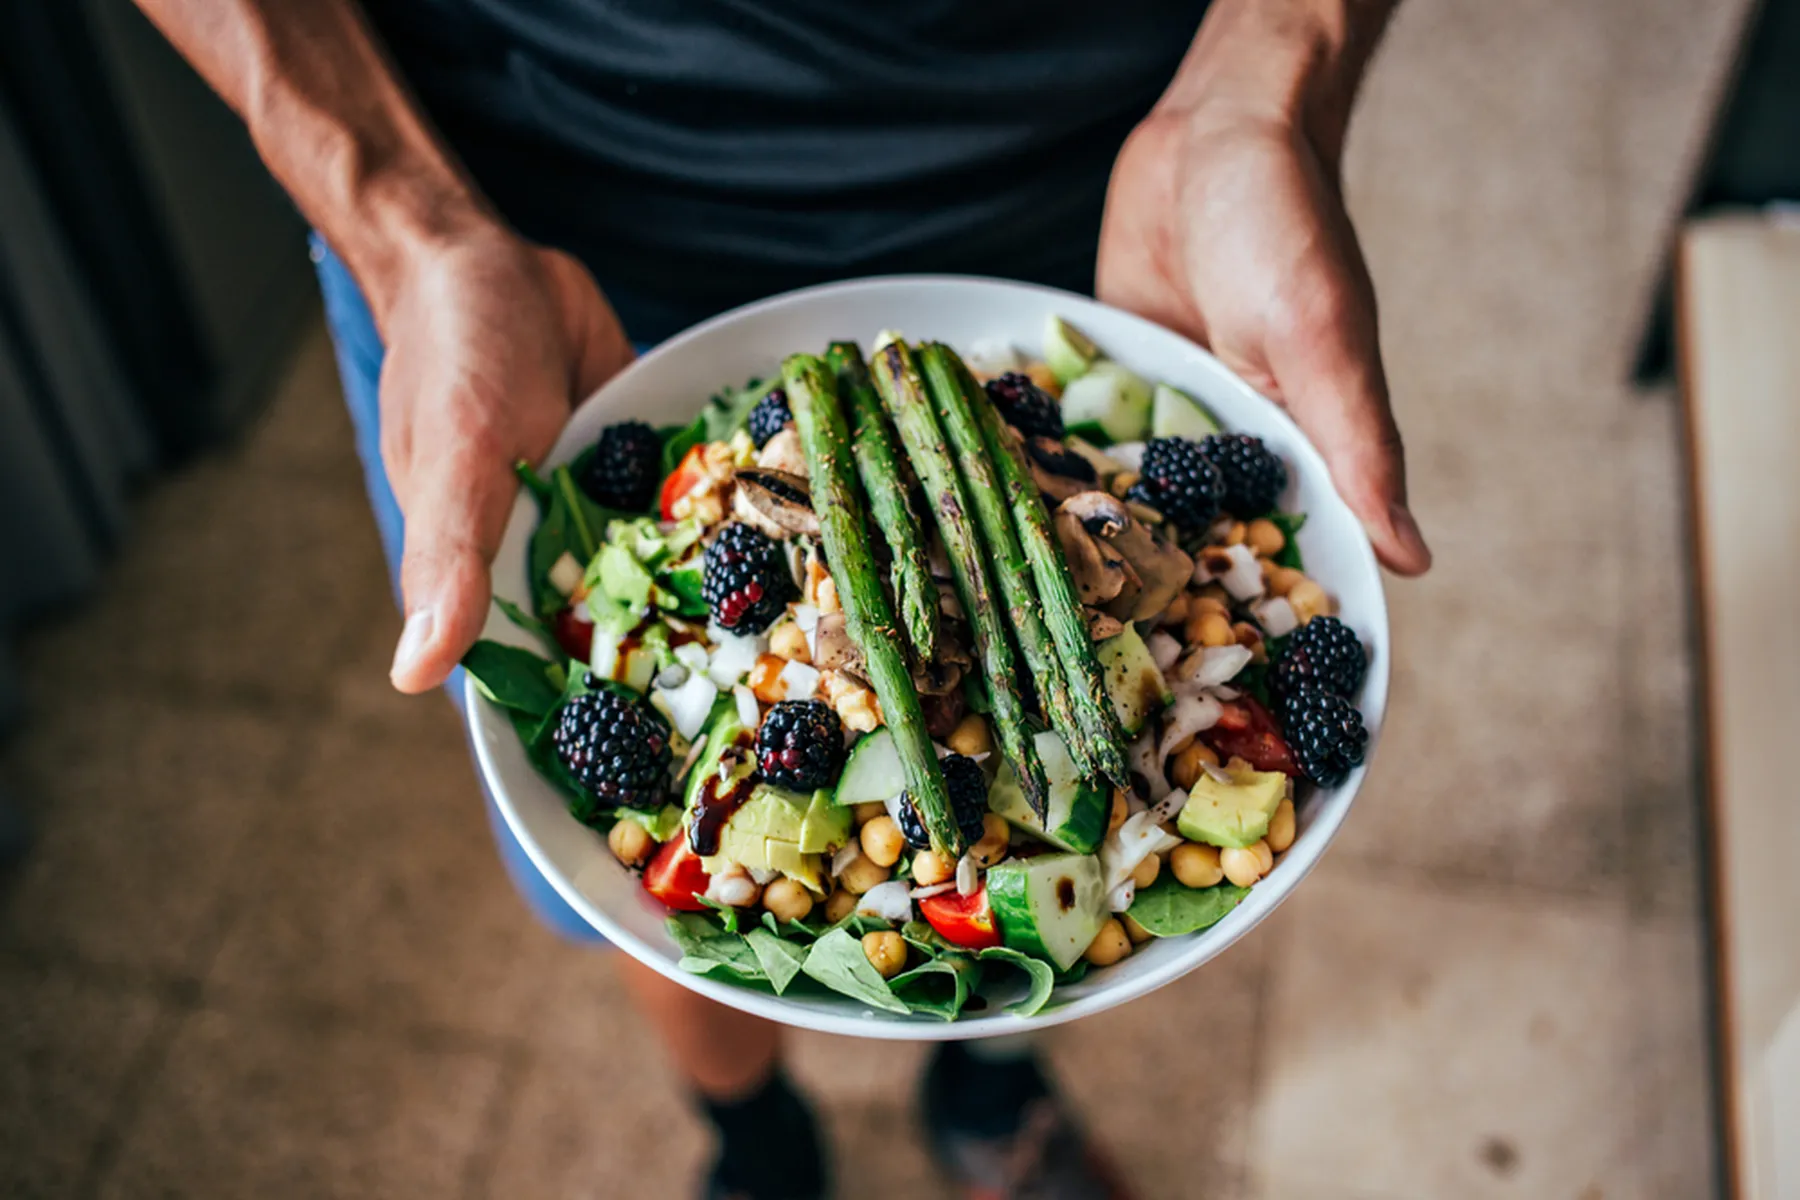 A man hands holds a salad with fruits, vegetables, and legumes such as asparagus, blackberries, cucumbers, and beans.